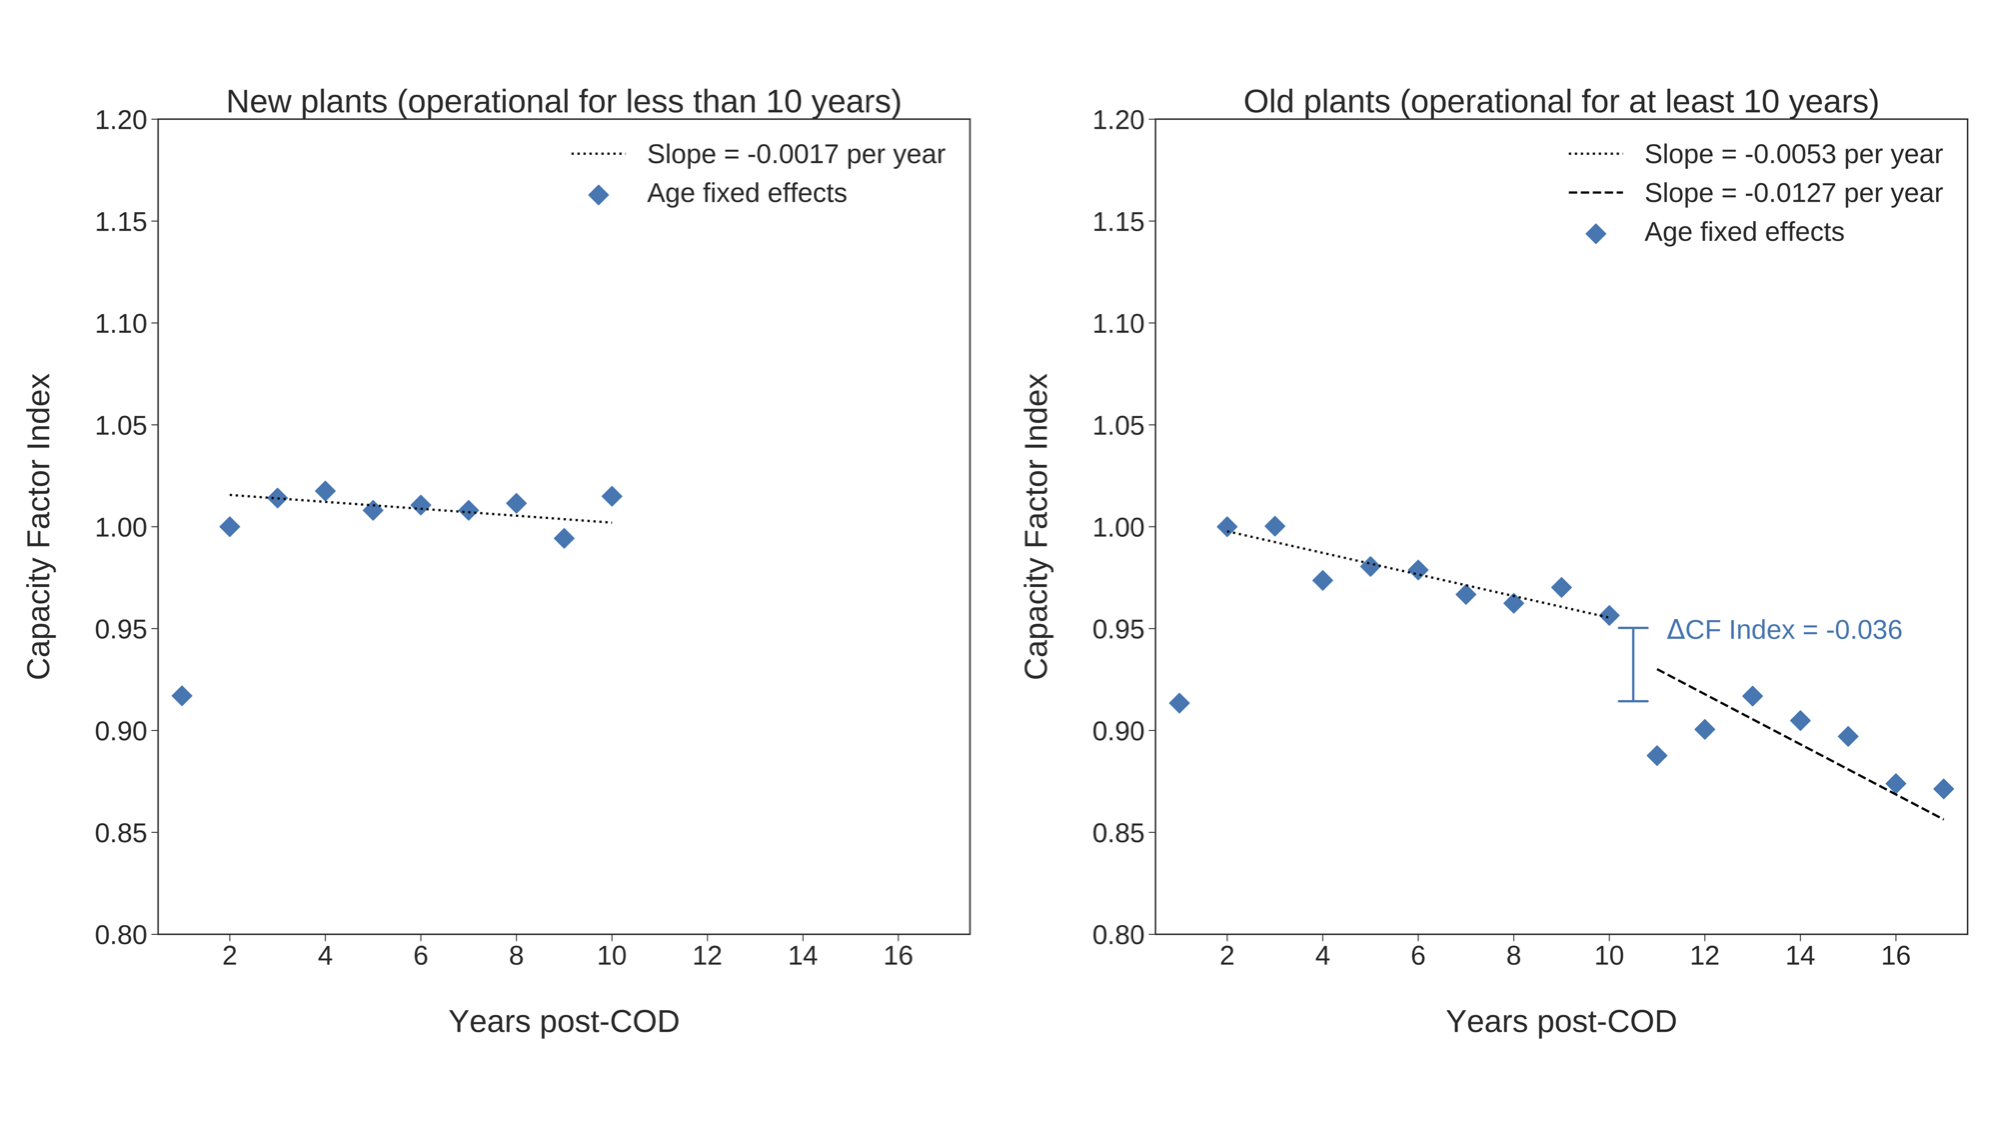 Average decline in performance with age for two cohorts of plants. COD stands for commercial online date. The y-axis can be interpreted as a ratio of performance to year 2, so, for example, a value of 0.95 indicates that a plant produced 95% of the energy in a particular year compared to year 2 of life.